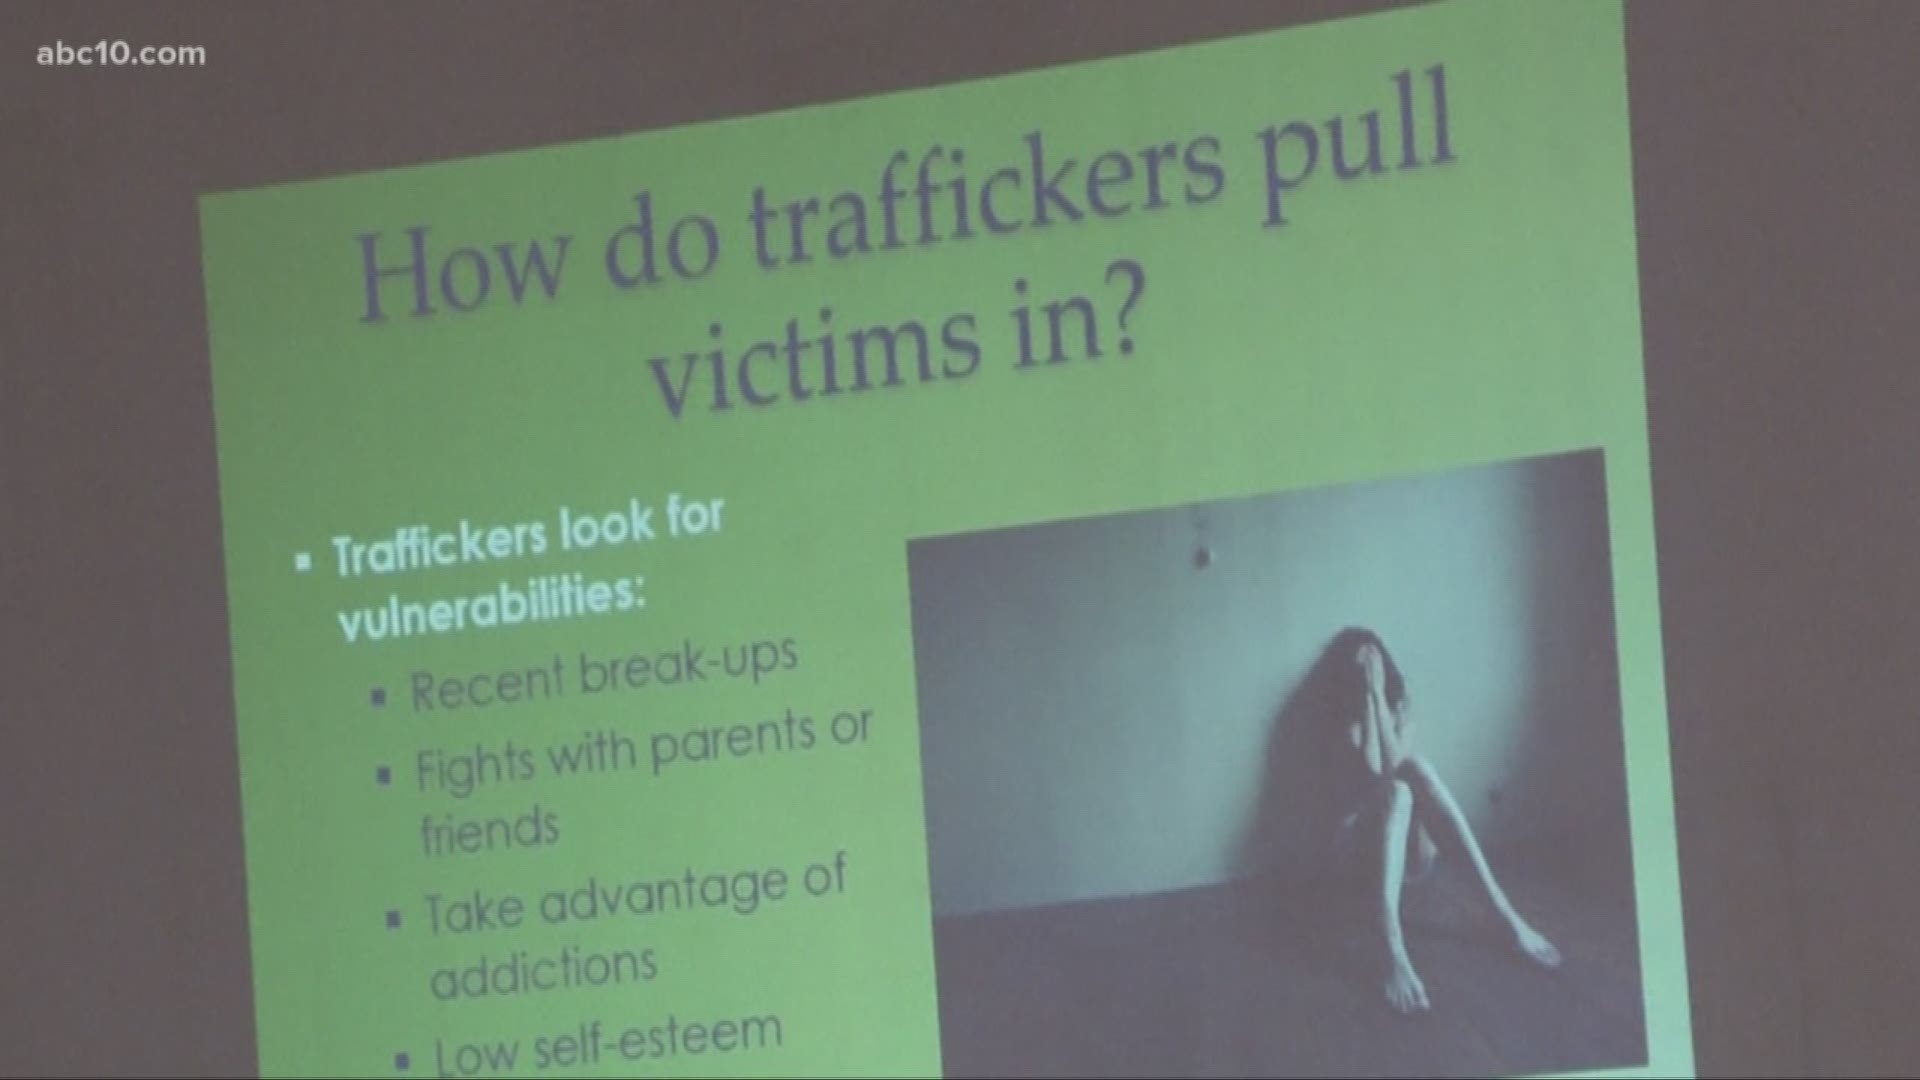 In more than an hour-long presentation, Suzanne Shultz graphically detailed how a life in prostitution can mean sexual slavery for years, sometimes decades. For parents, she noted signs to look out for that perhaps their child has become a victim.